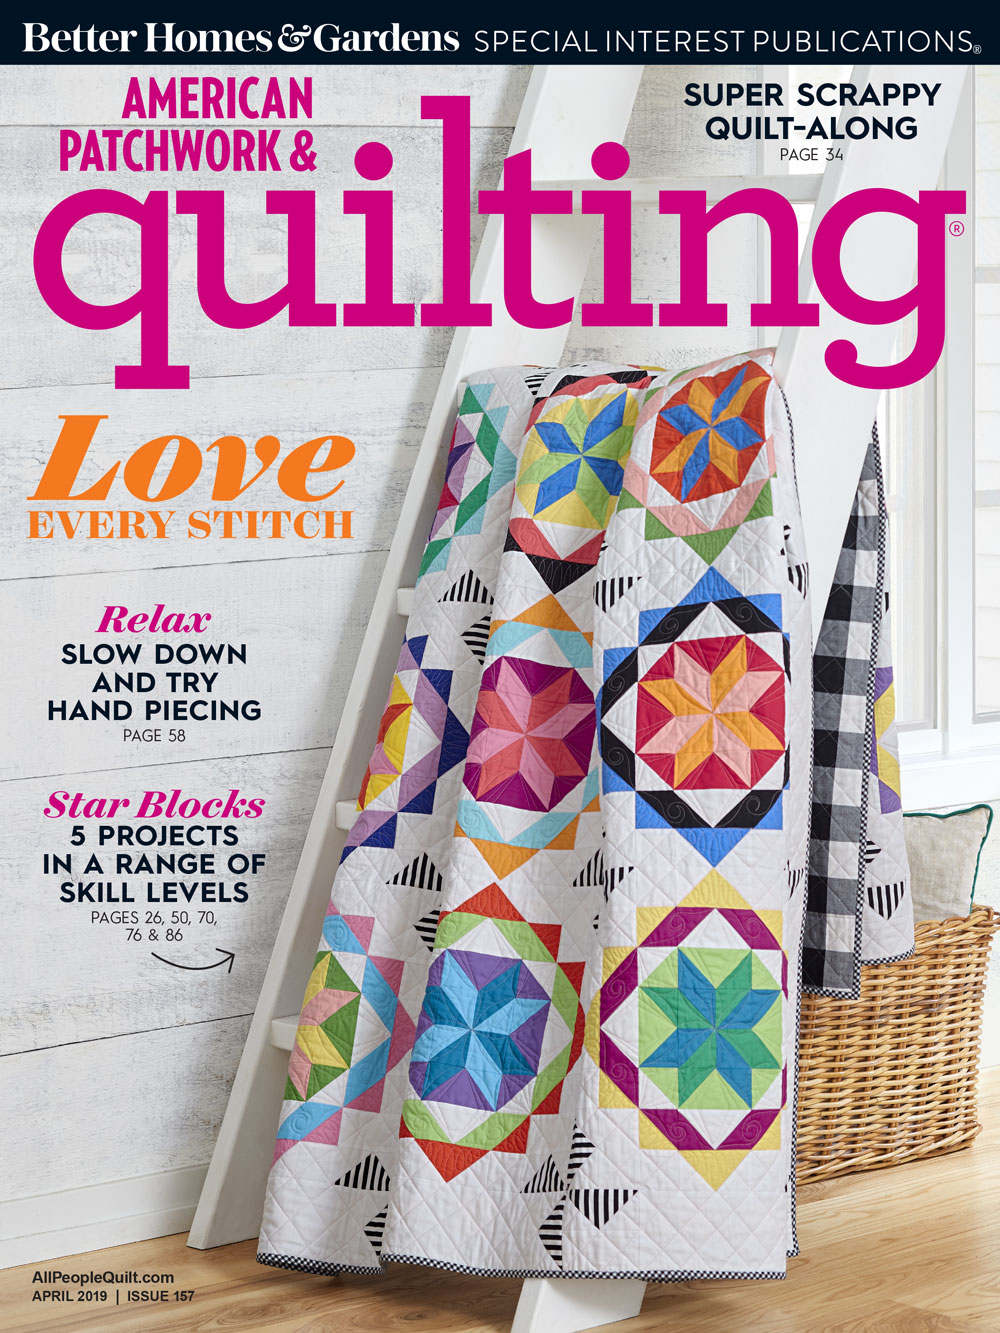 american-patchwork-quilting-april-2019-issue-swing-into-spring-quilt